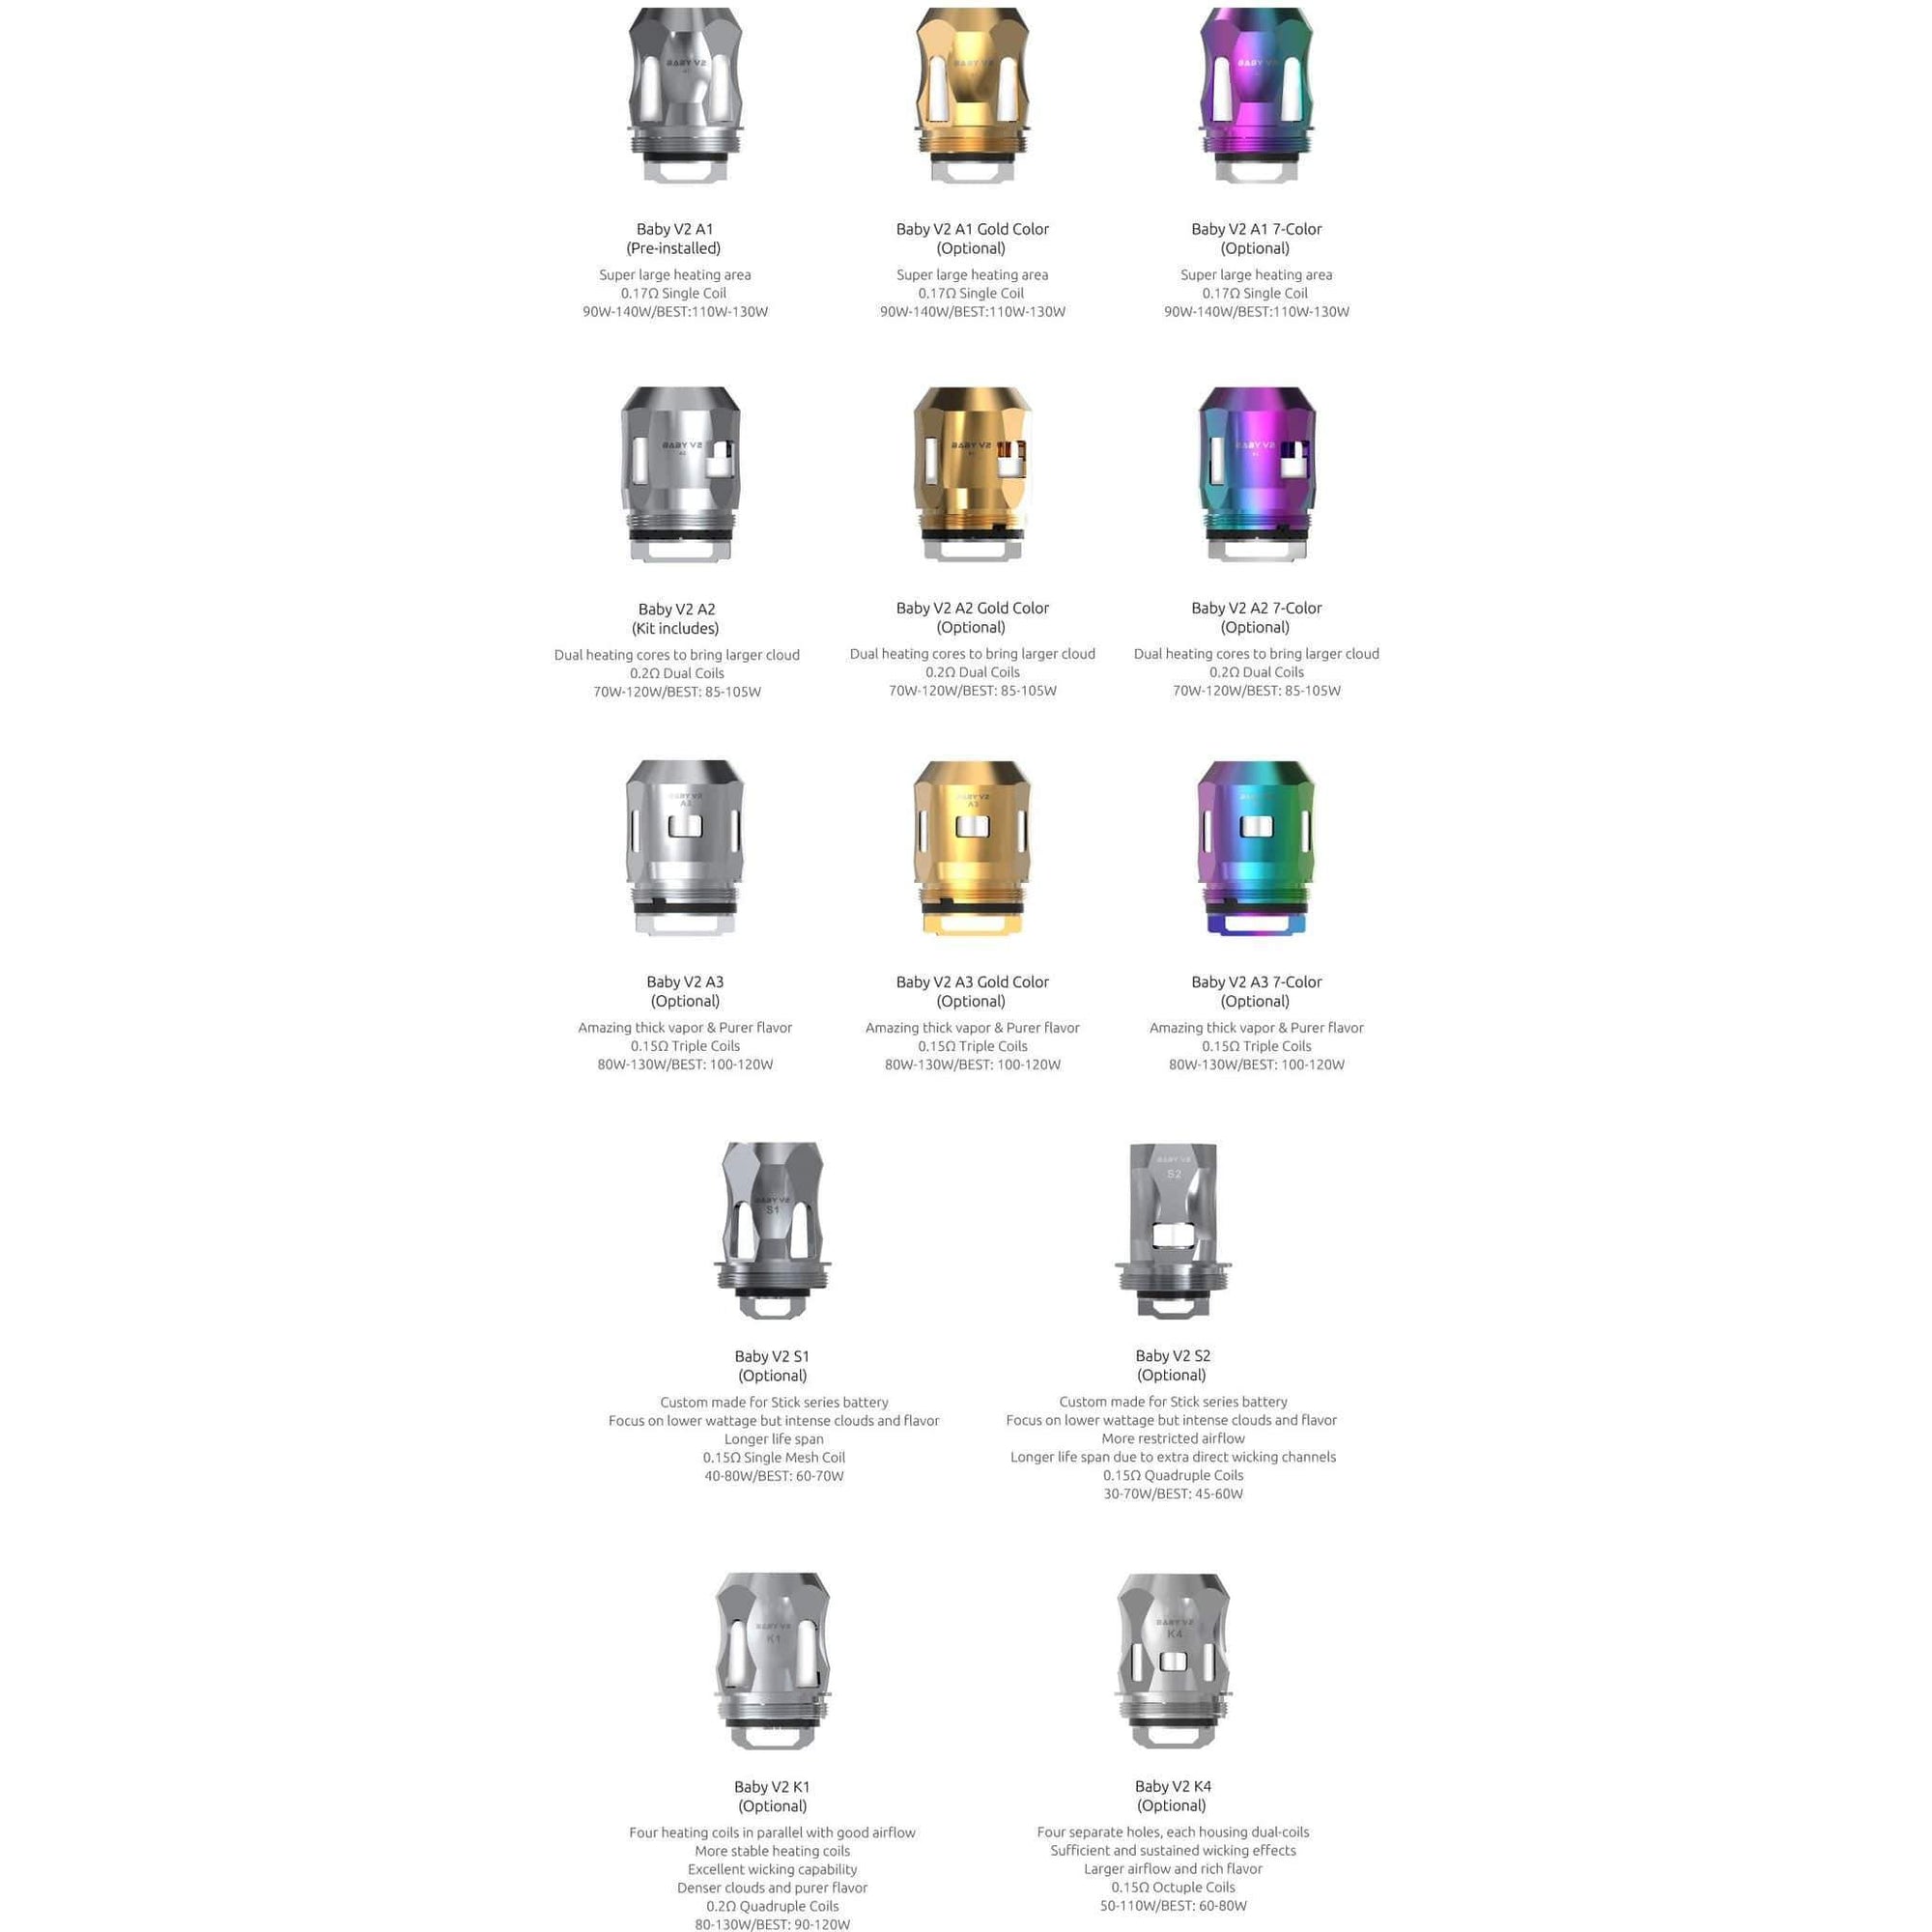 SMOK TFV8 BABY V2 REPLACEMENT COILS Replacement Coils